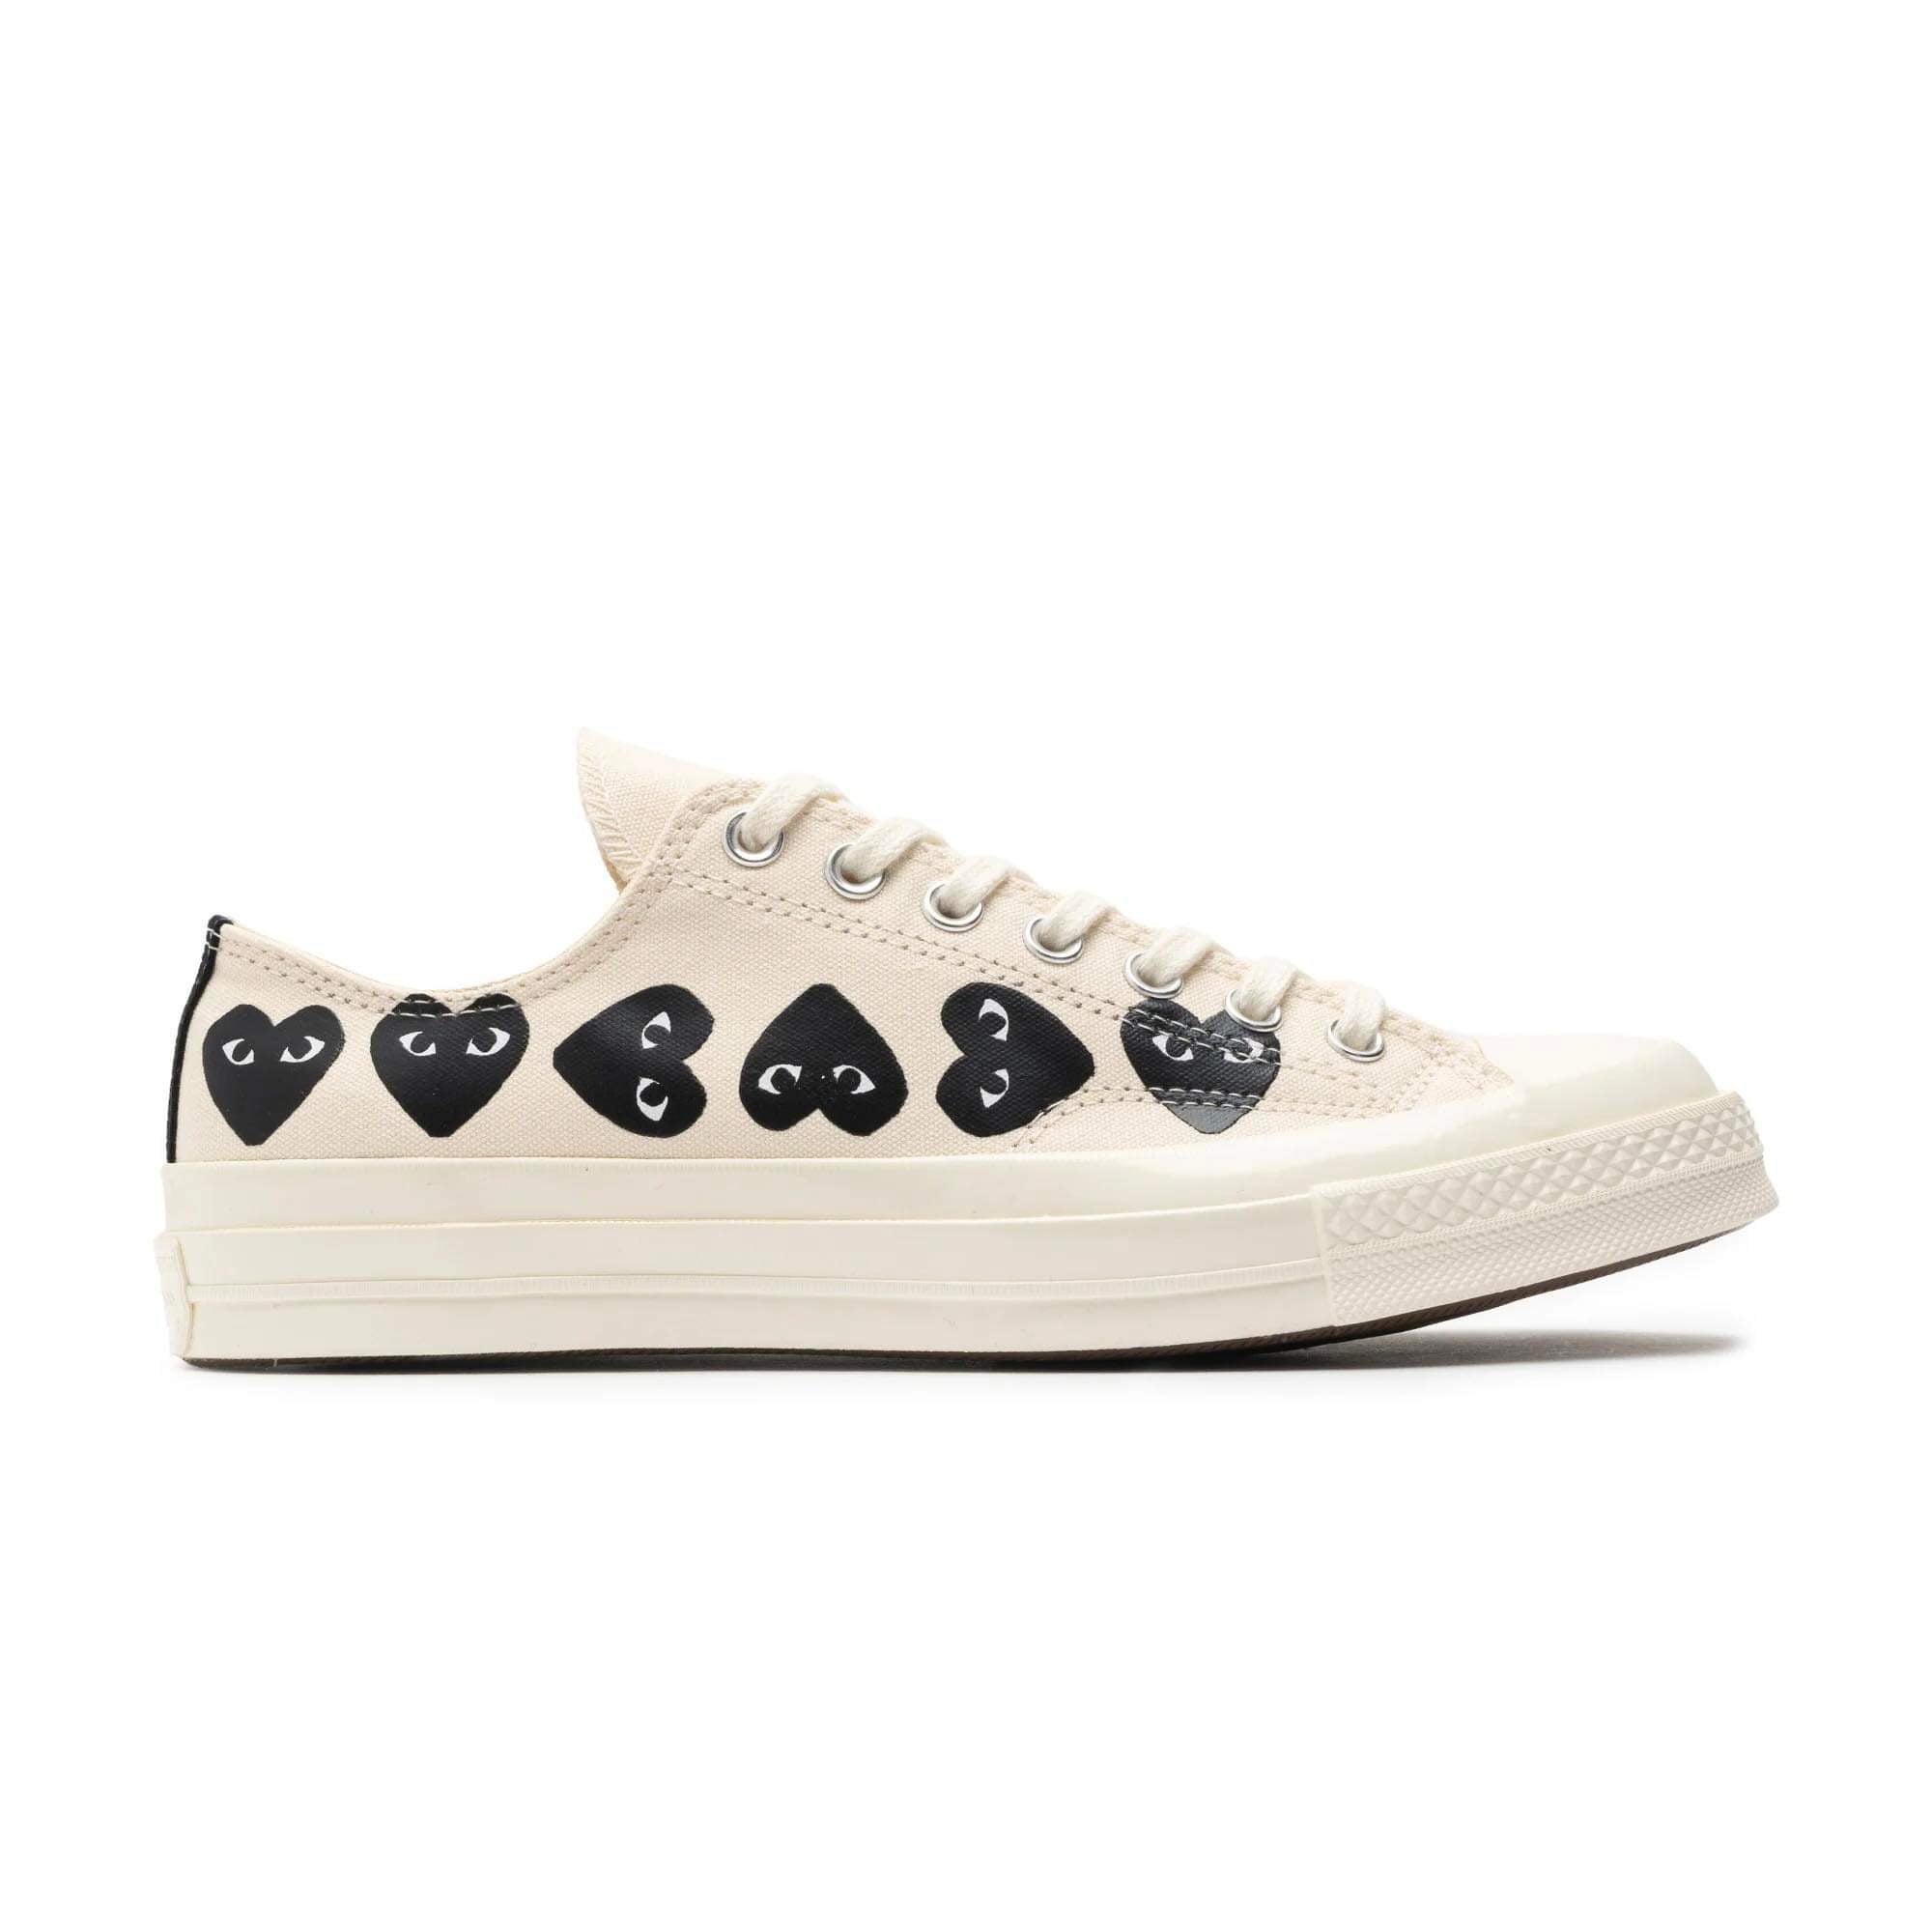 Converse Chuck Taylor All Star 70 Ox Comme des Garcons Play Multi-Heart White Black